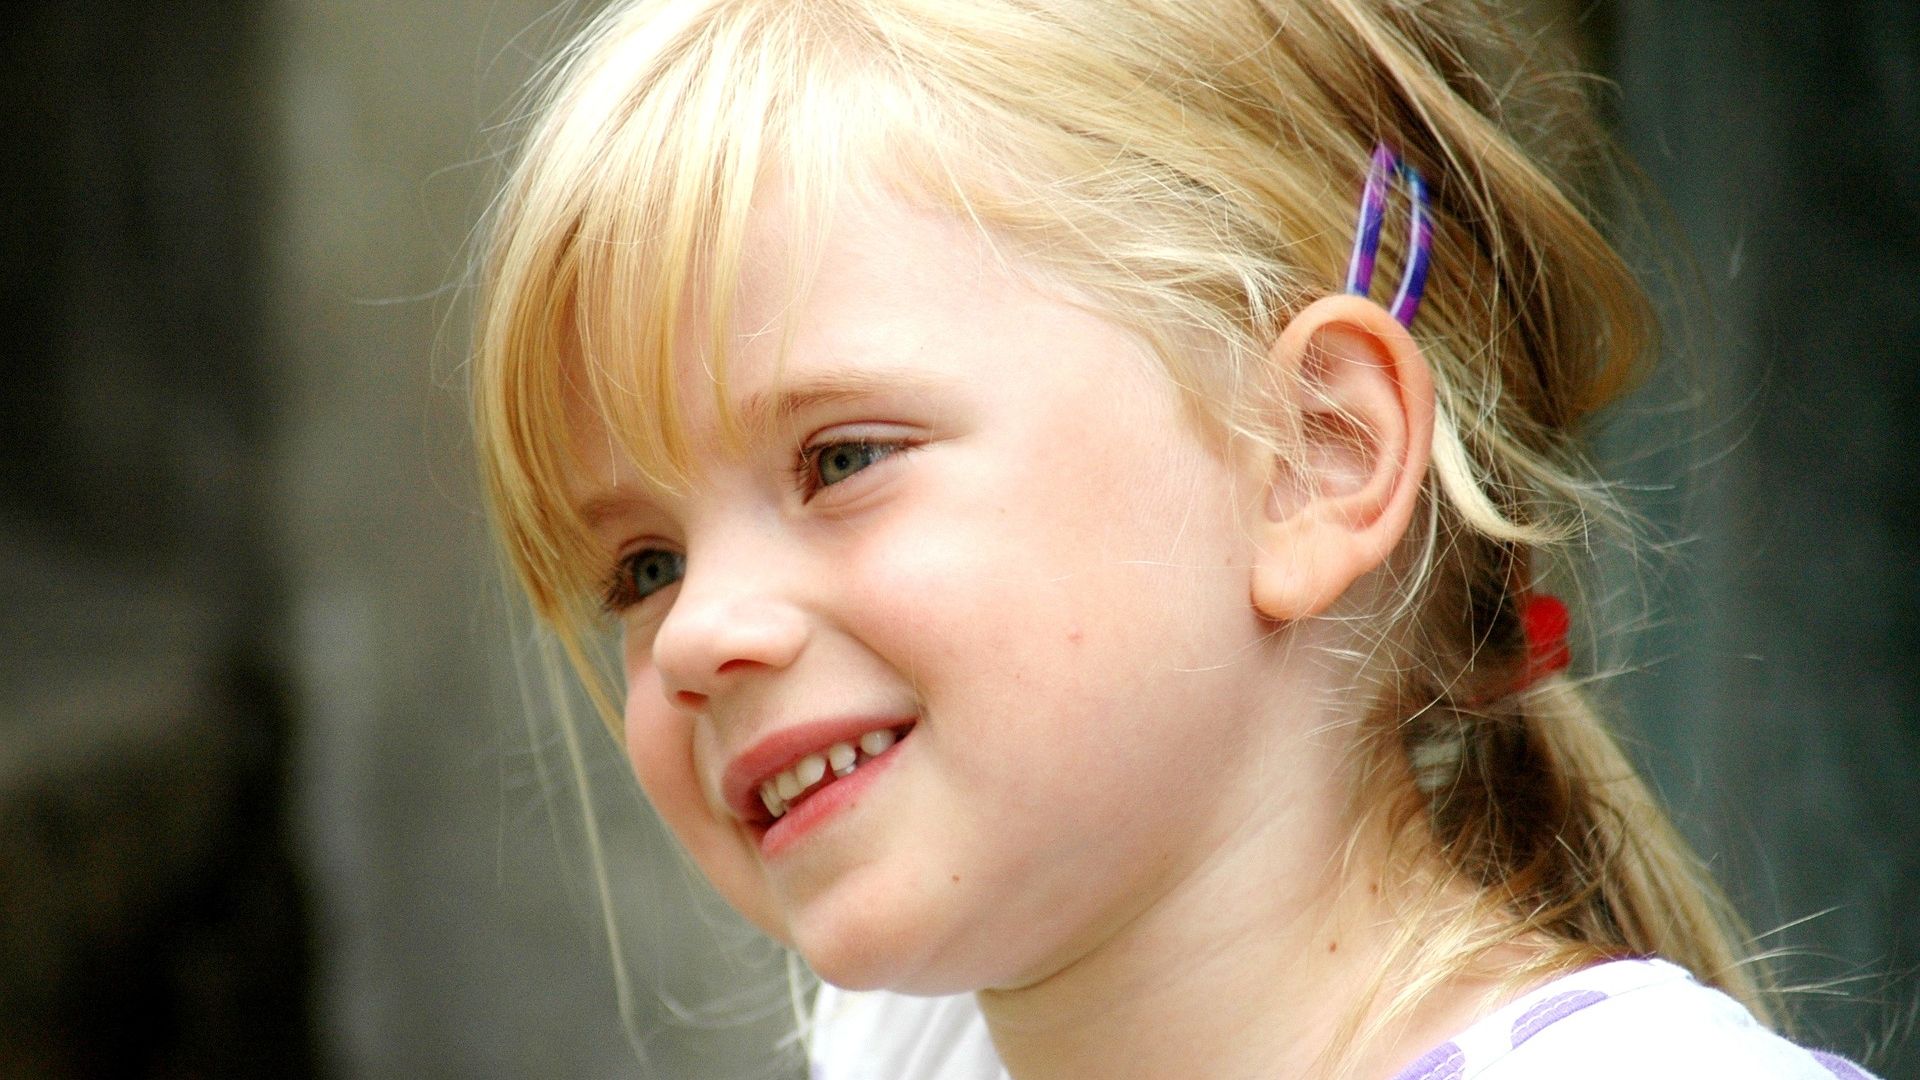 Wallpaper Cute baby girl's smiling face, blonde